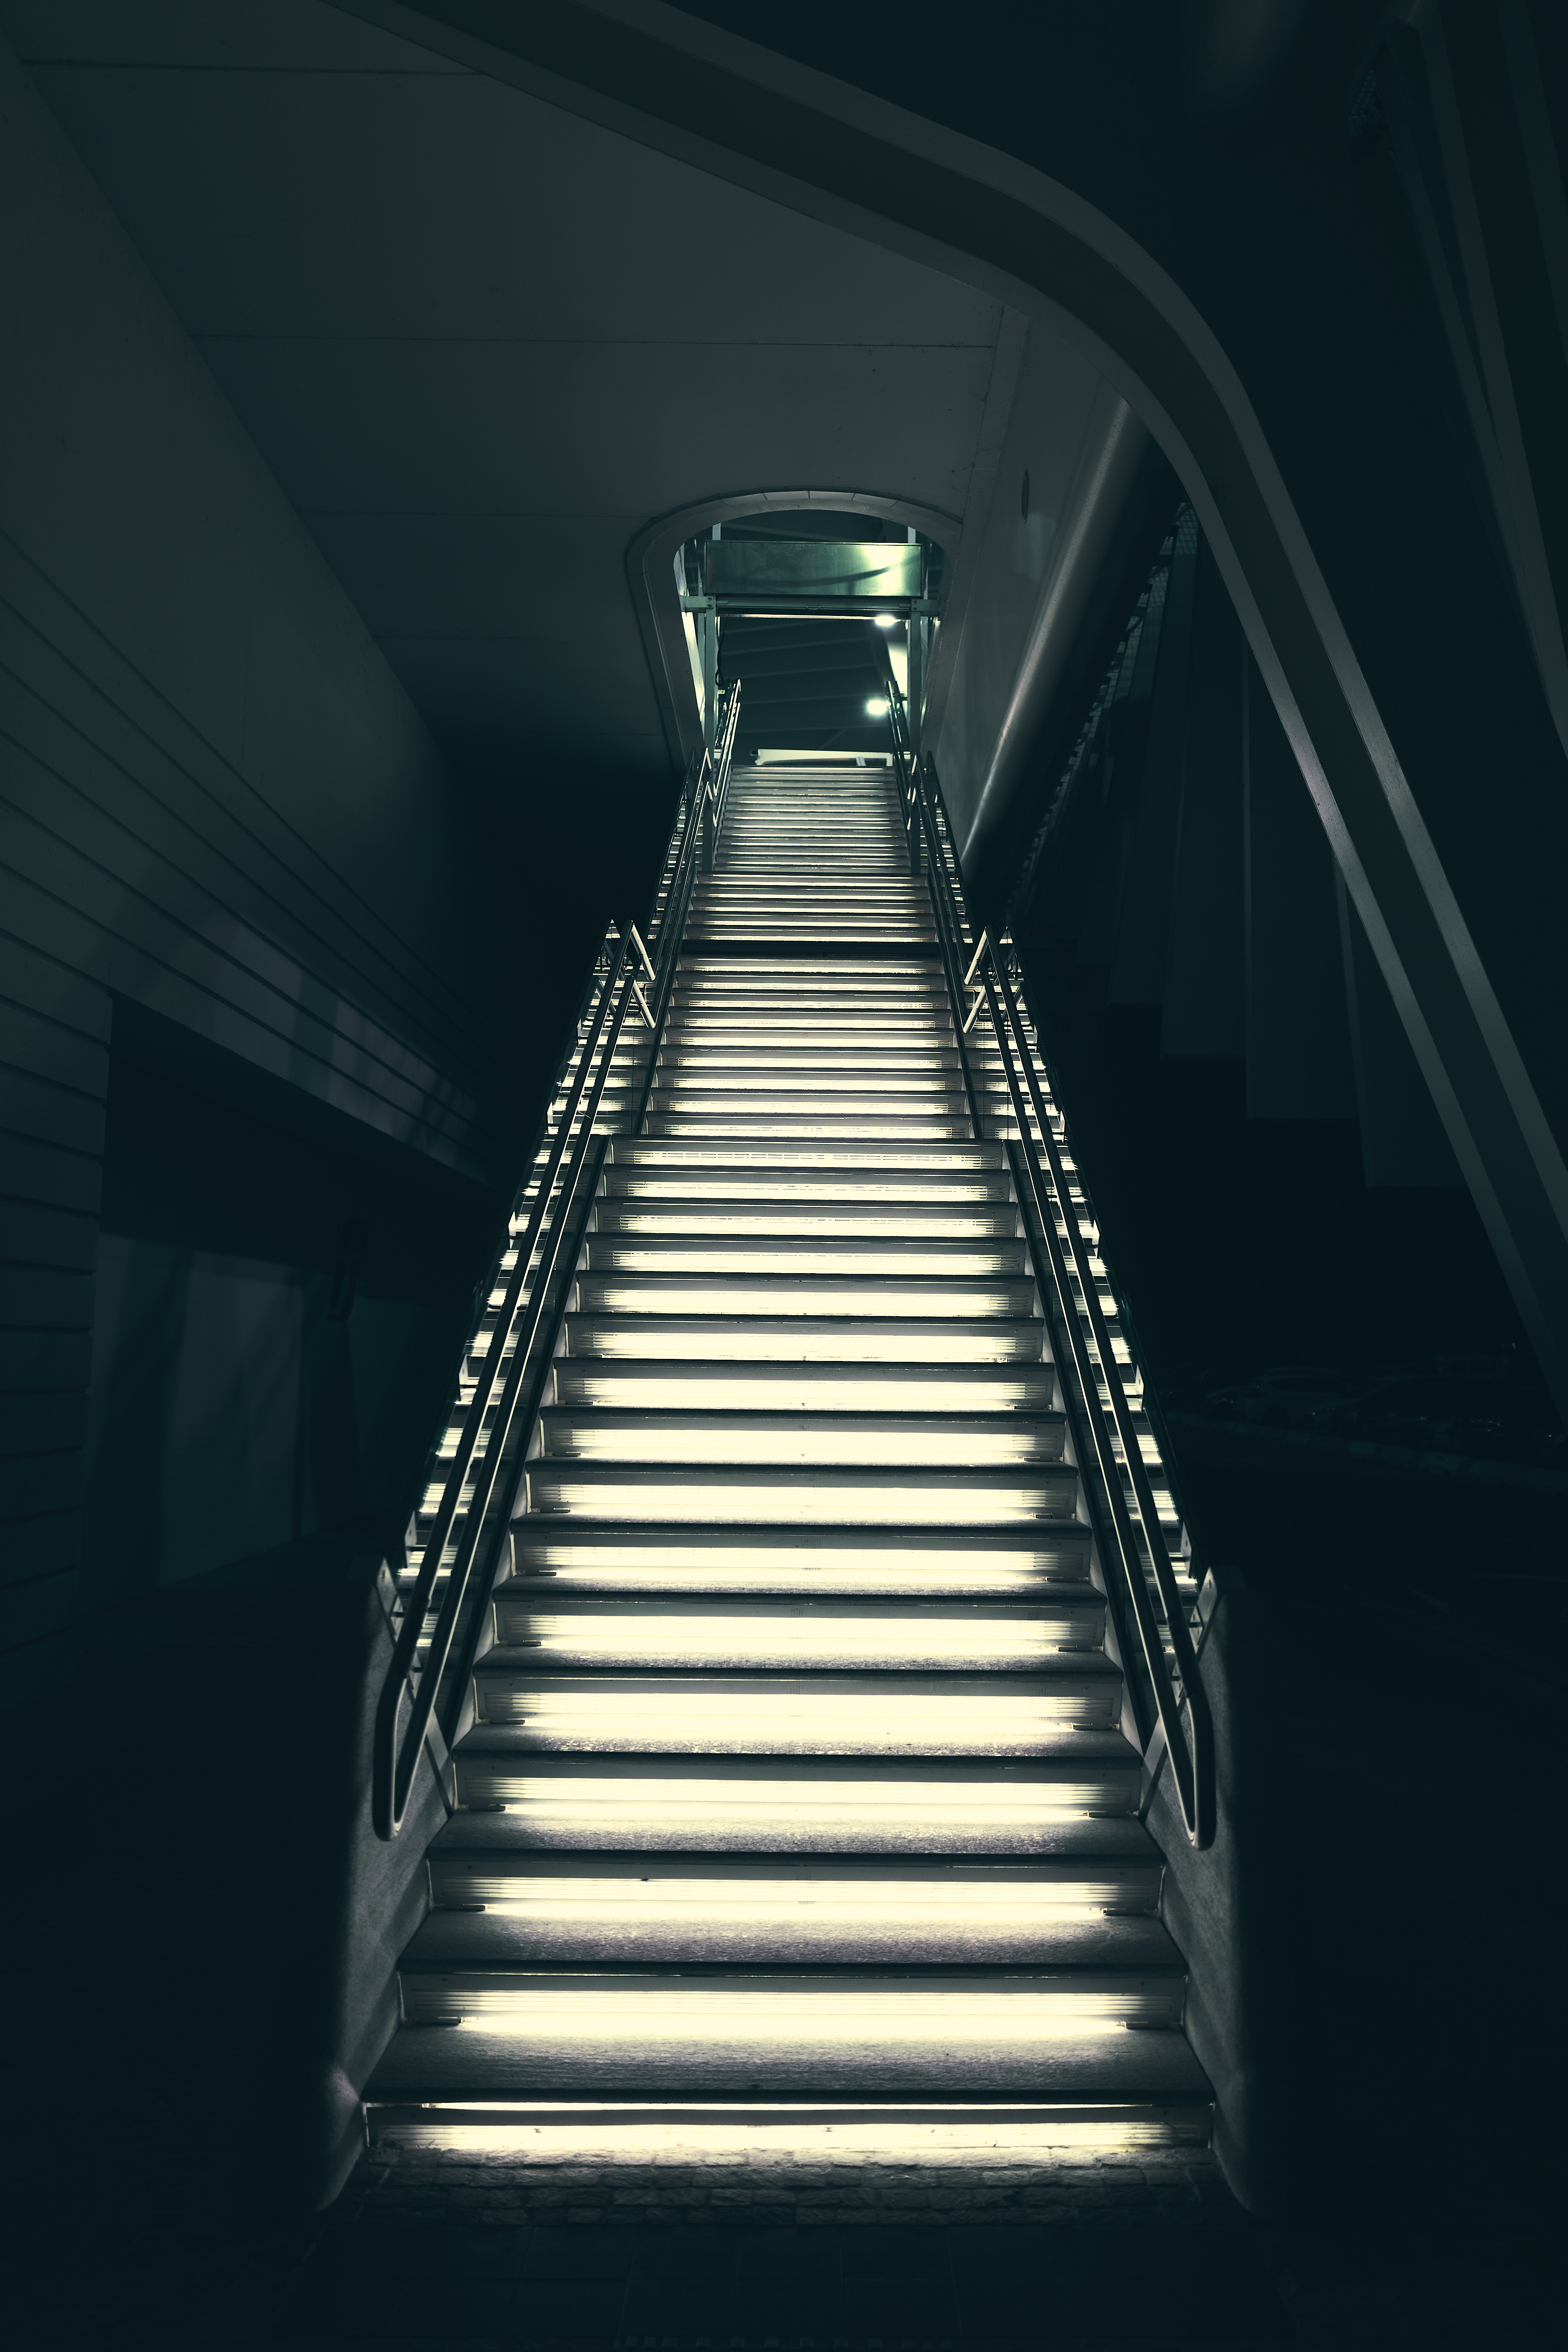 Download background backlight, miscellanea, miscellaneous, illumination, stairs, ladder, output, exit